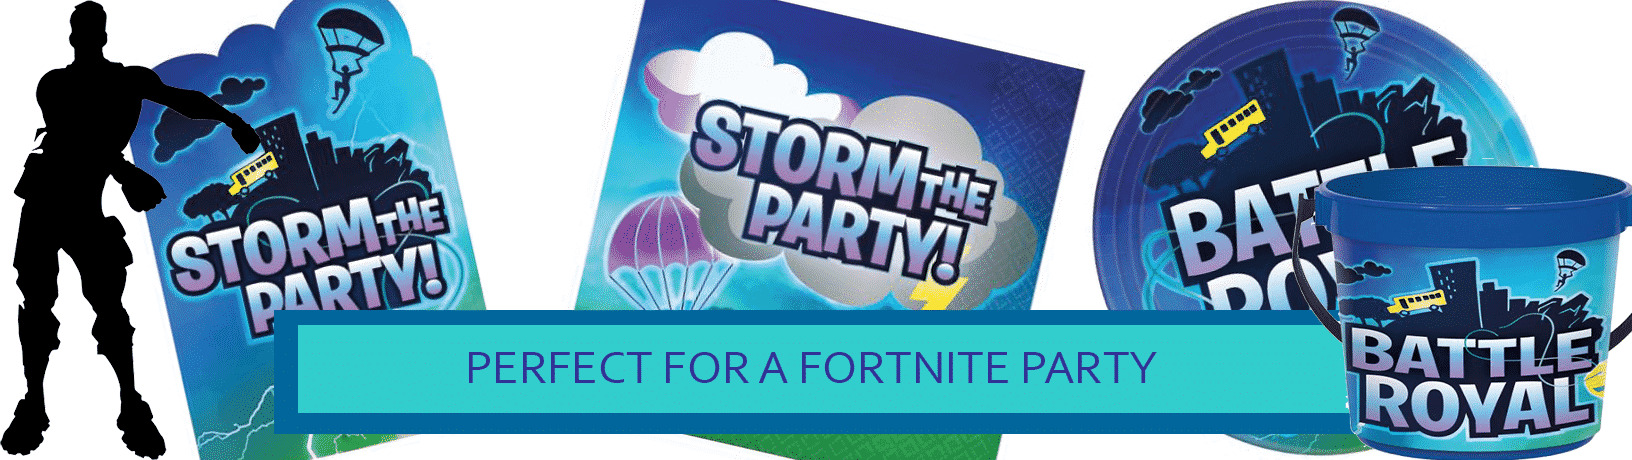 Fortnite Themed Battle Royal Party Decorations, Banners & Balloons - Next Day UK Delivery